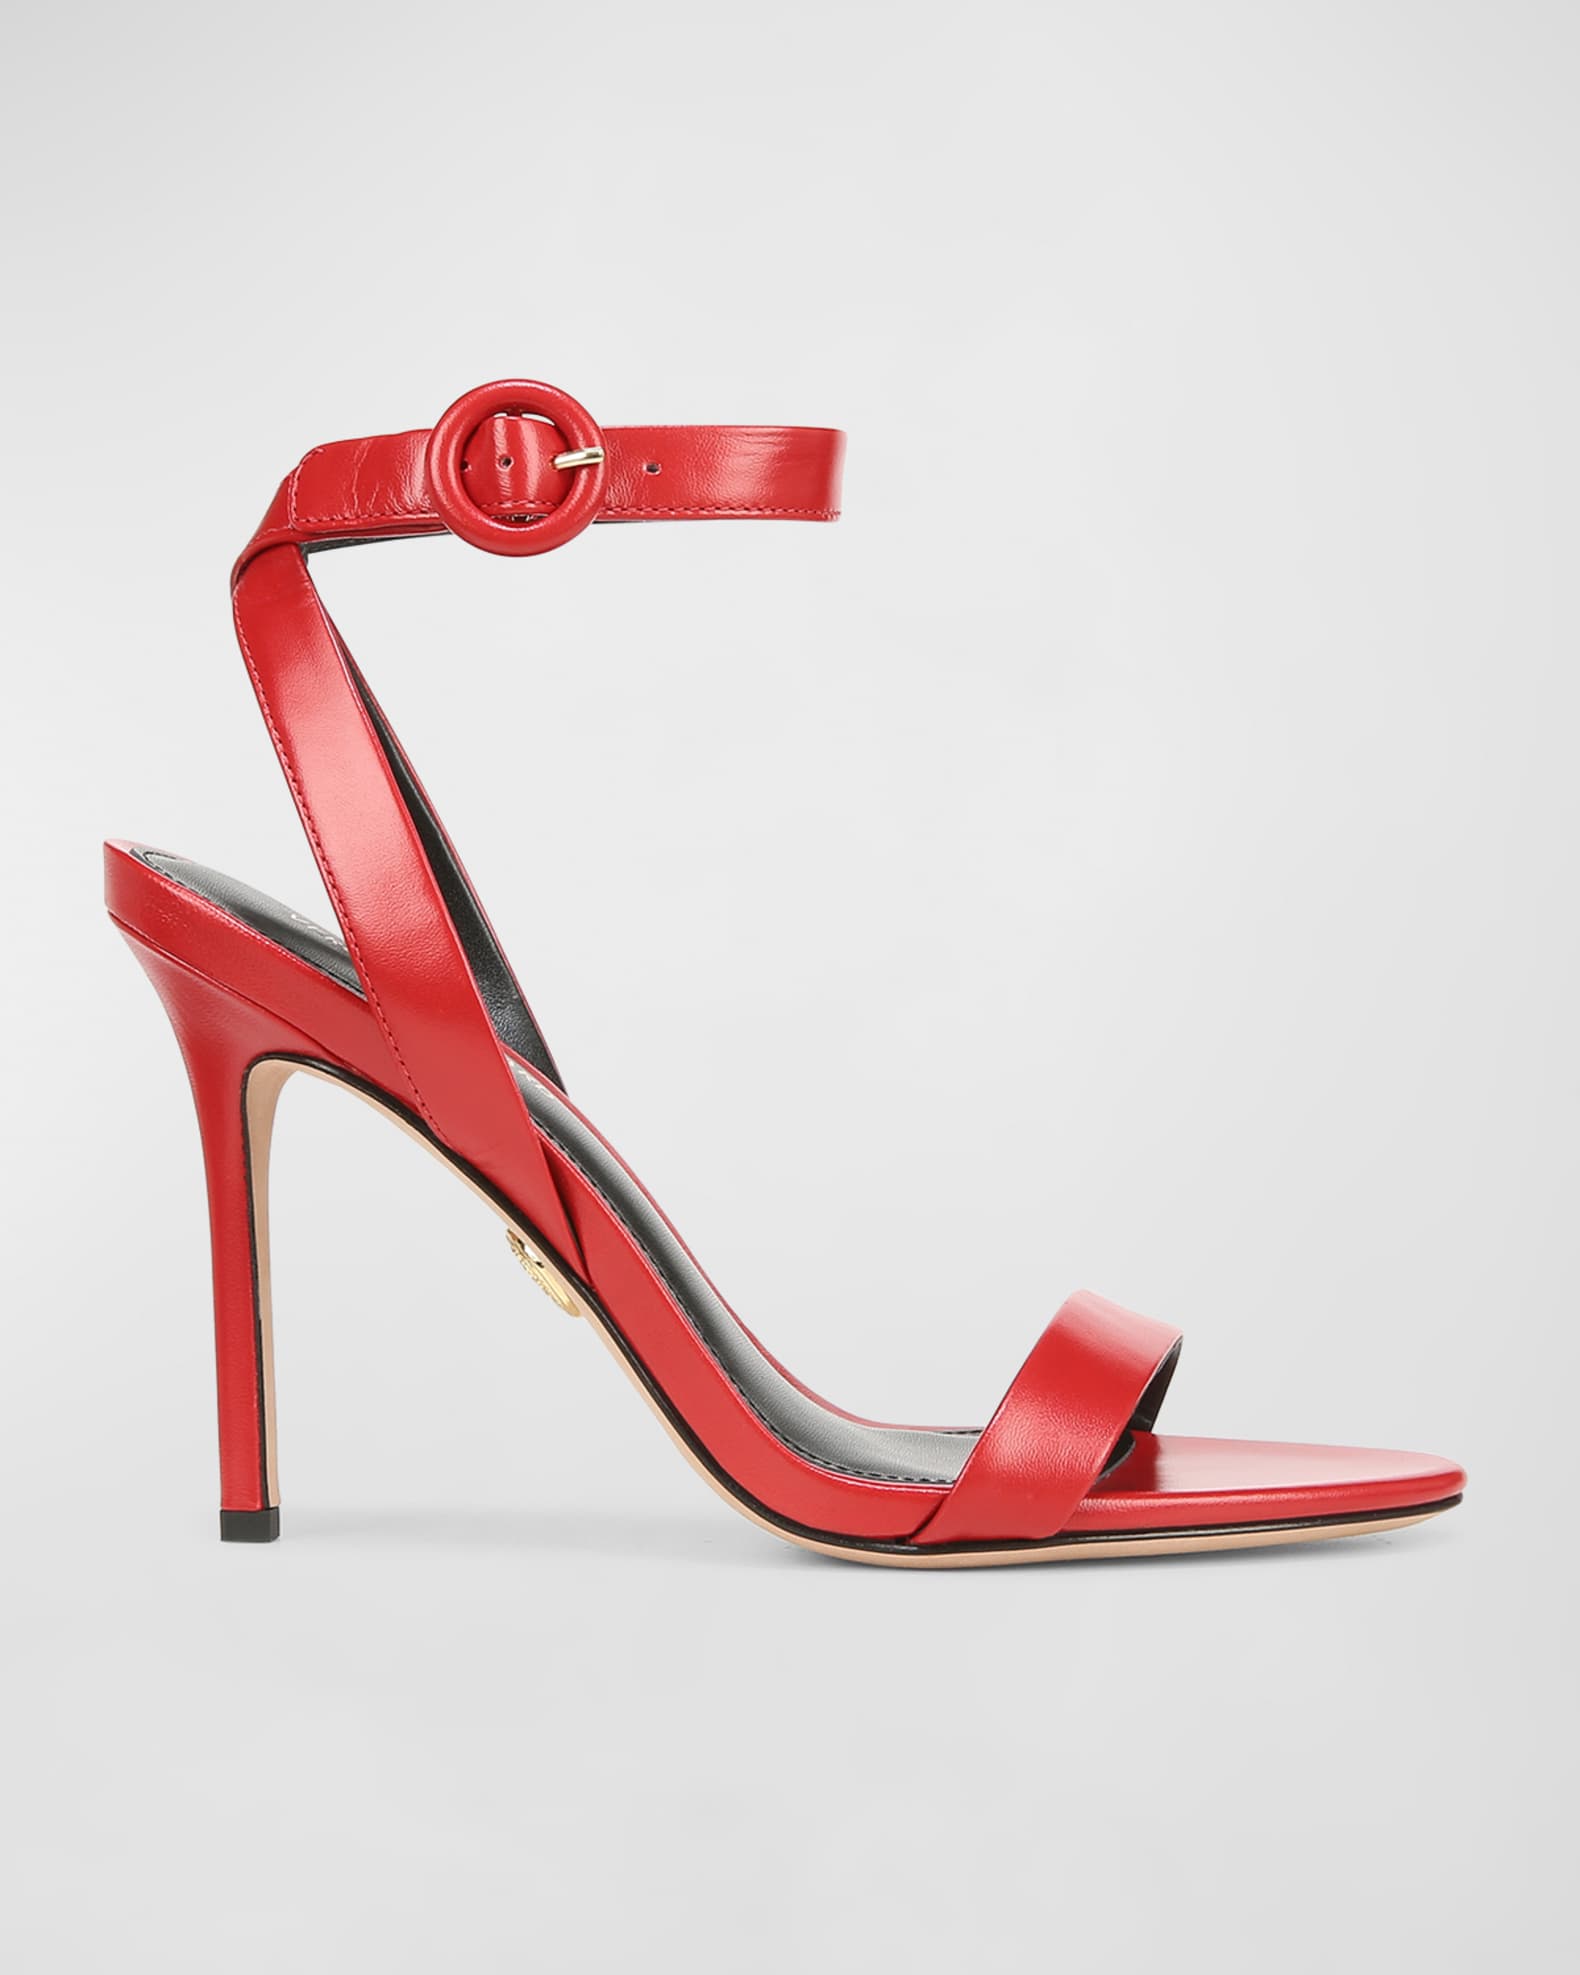 Veronica Beard Darcelle Leather Ankle-Strap Sandals | Neiman Marcus